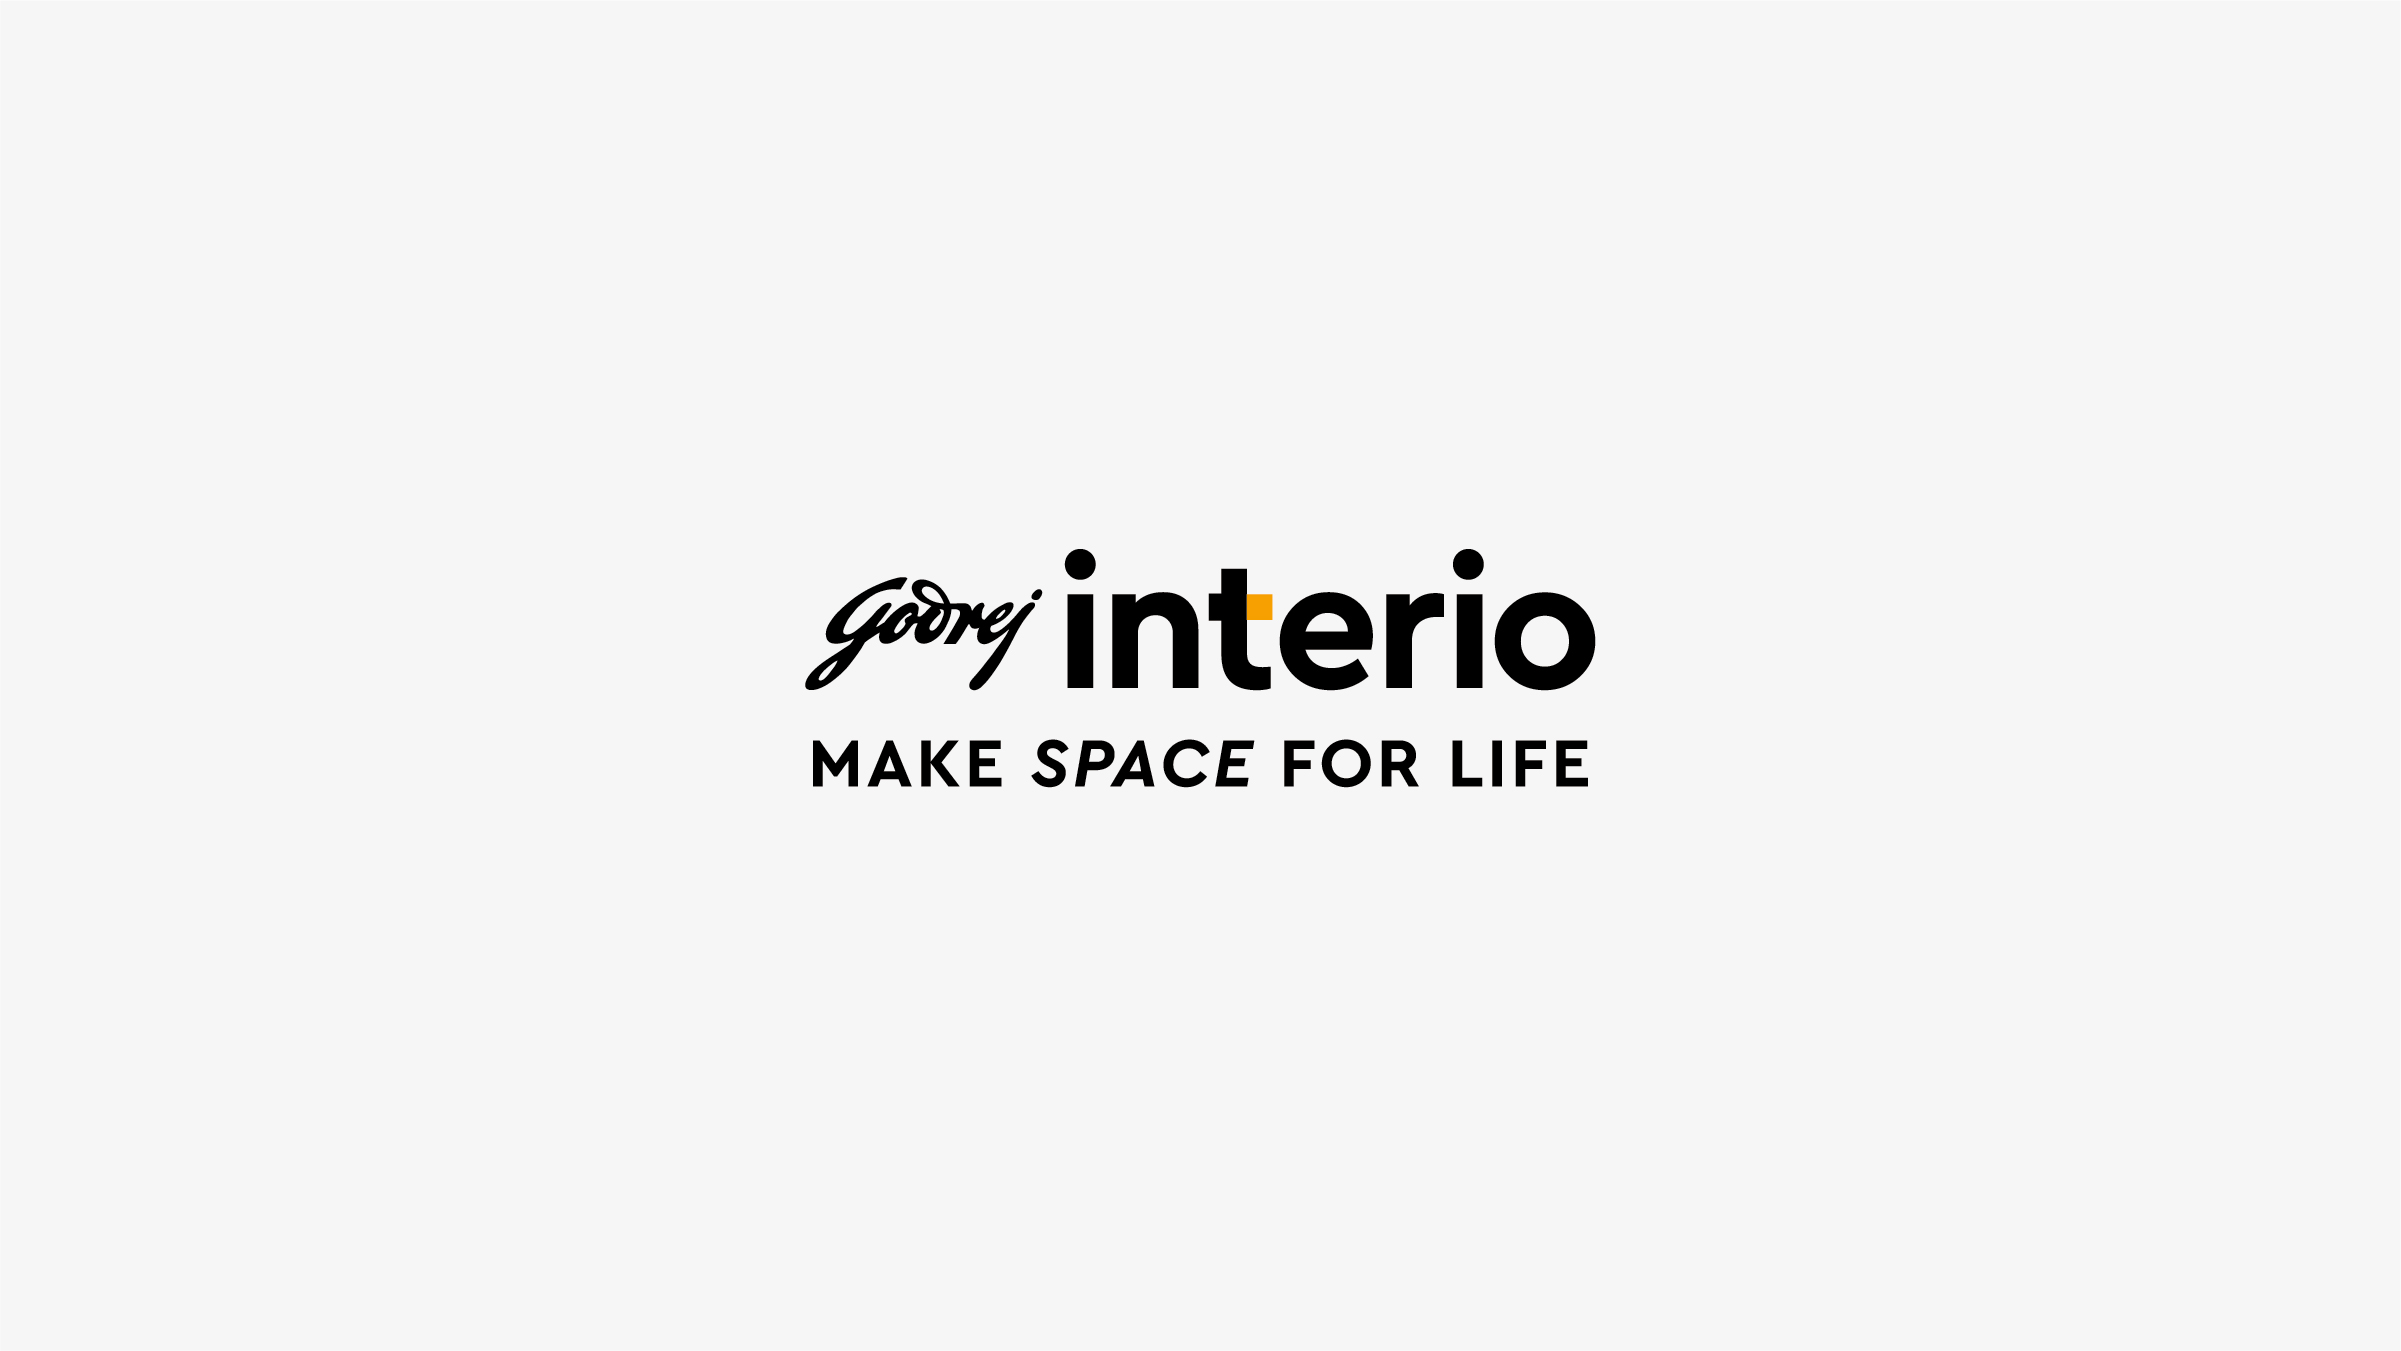 godrej-interio-commits-to-use-recyclable-packaging-solutions